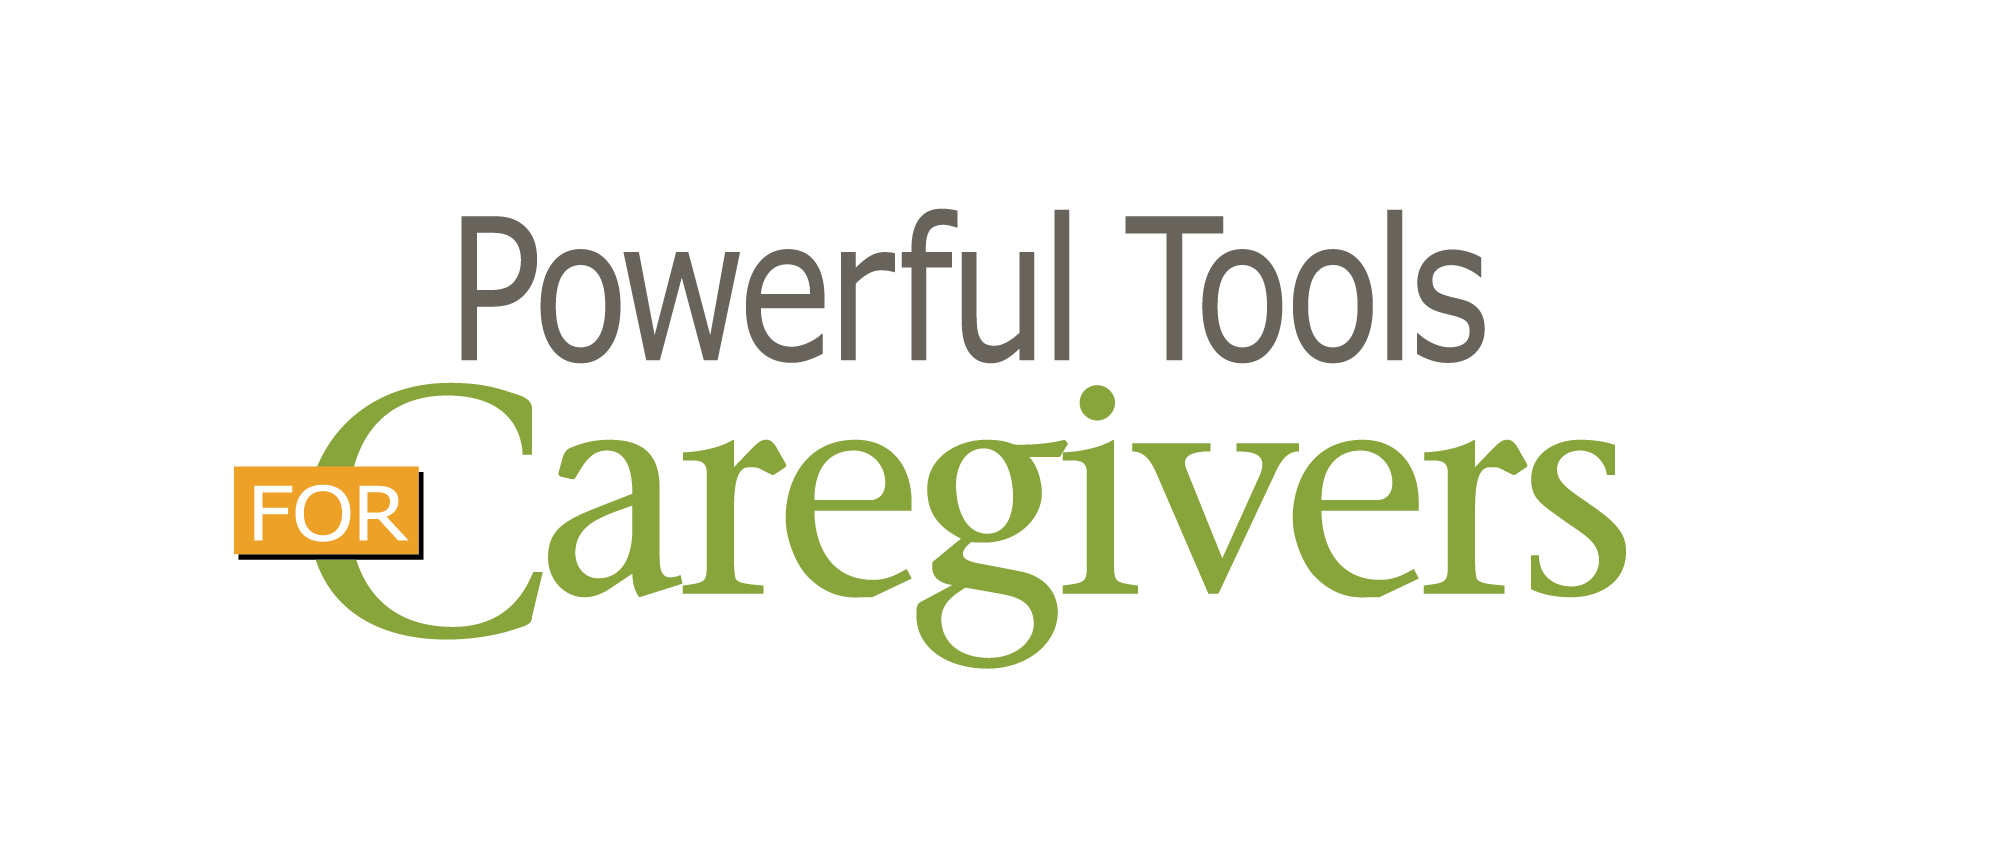 Powerful Tools for Caregivers Logo